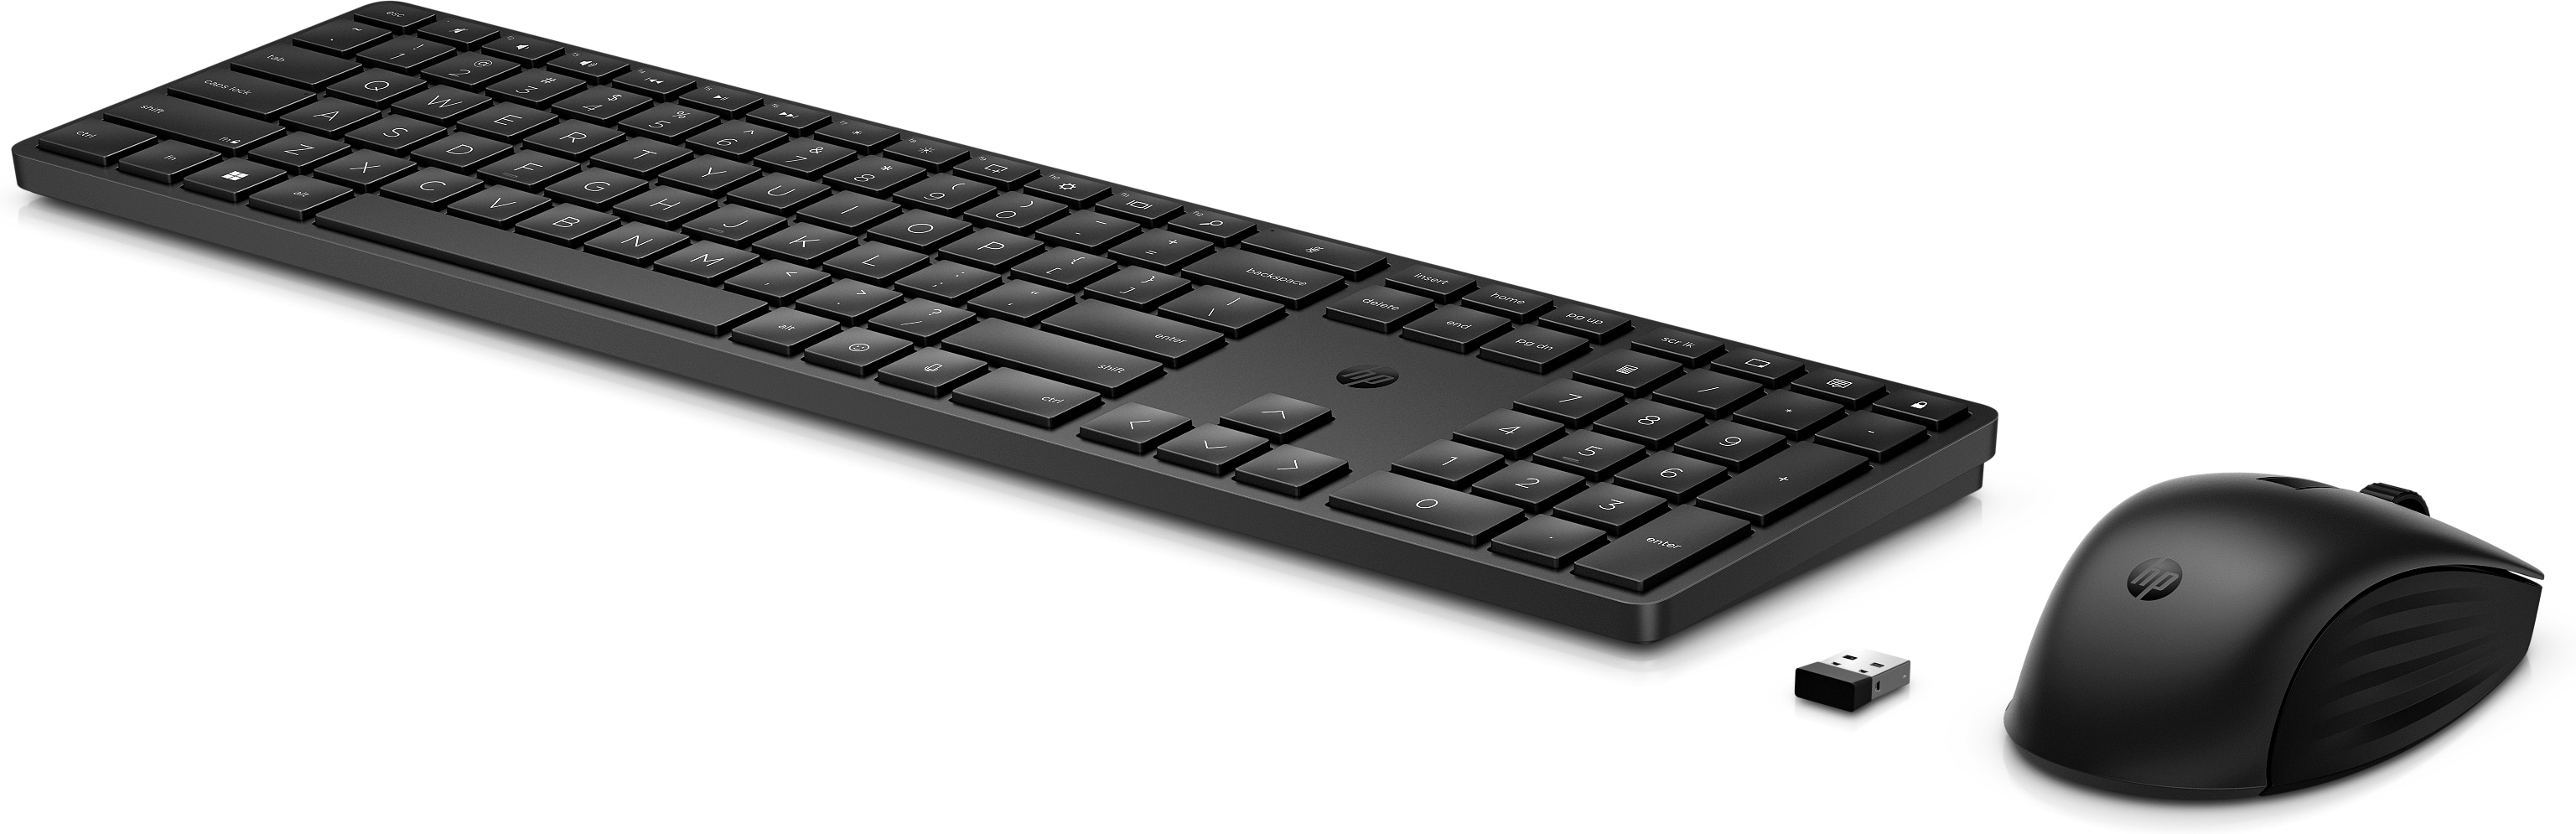 Combo 655 Mouse Keyboard and Wireless HP